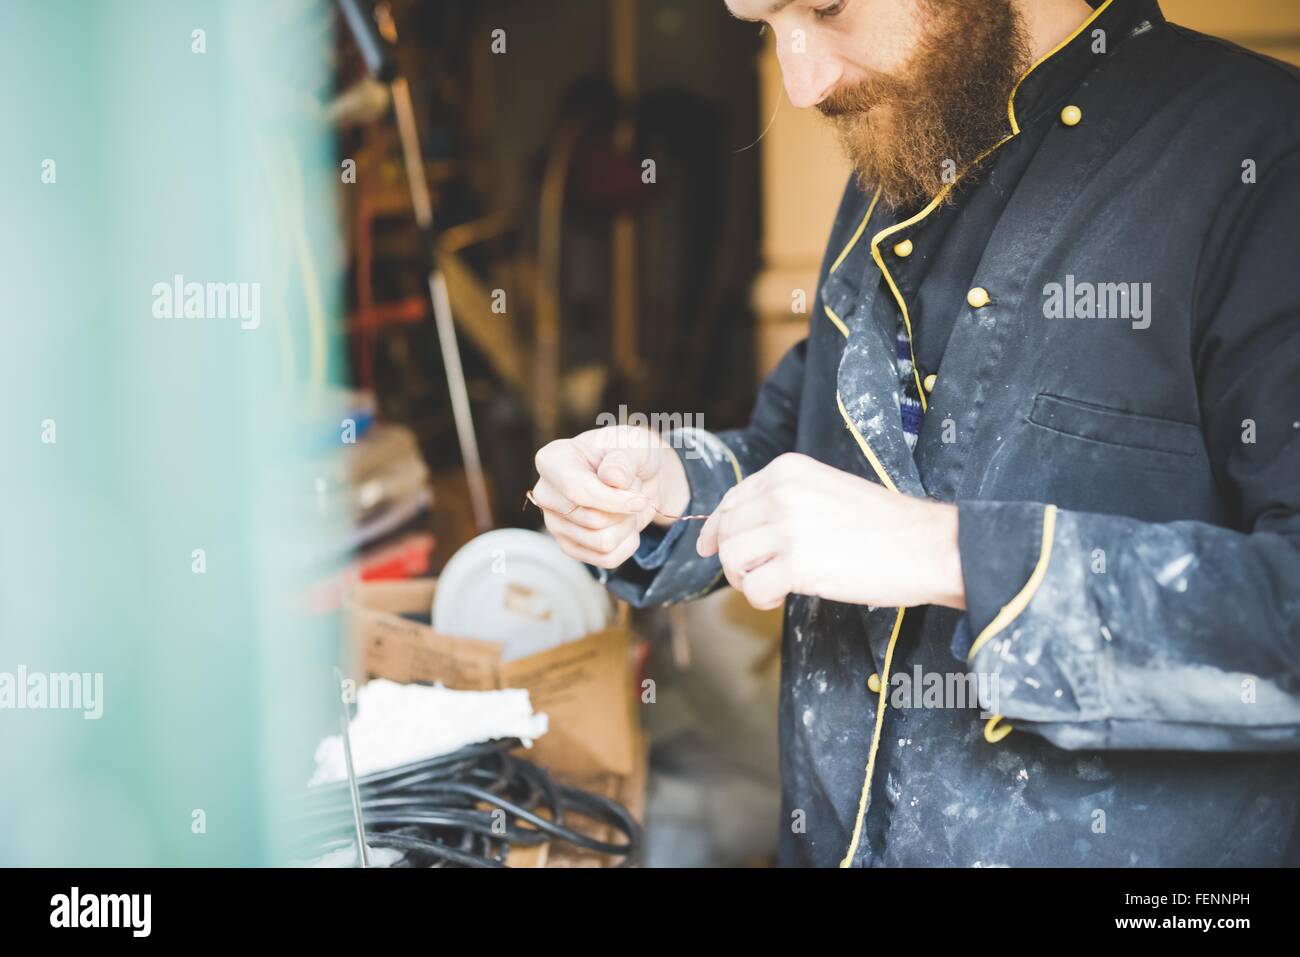 Bearded man in workshop holding wire looking down Stock Photo